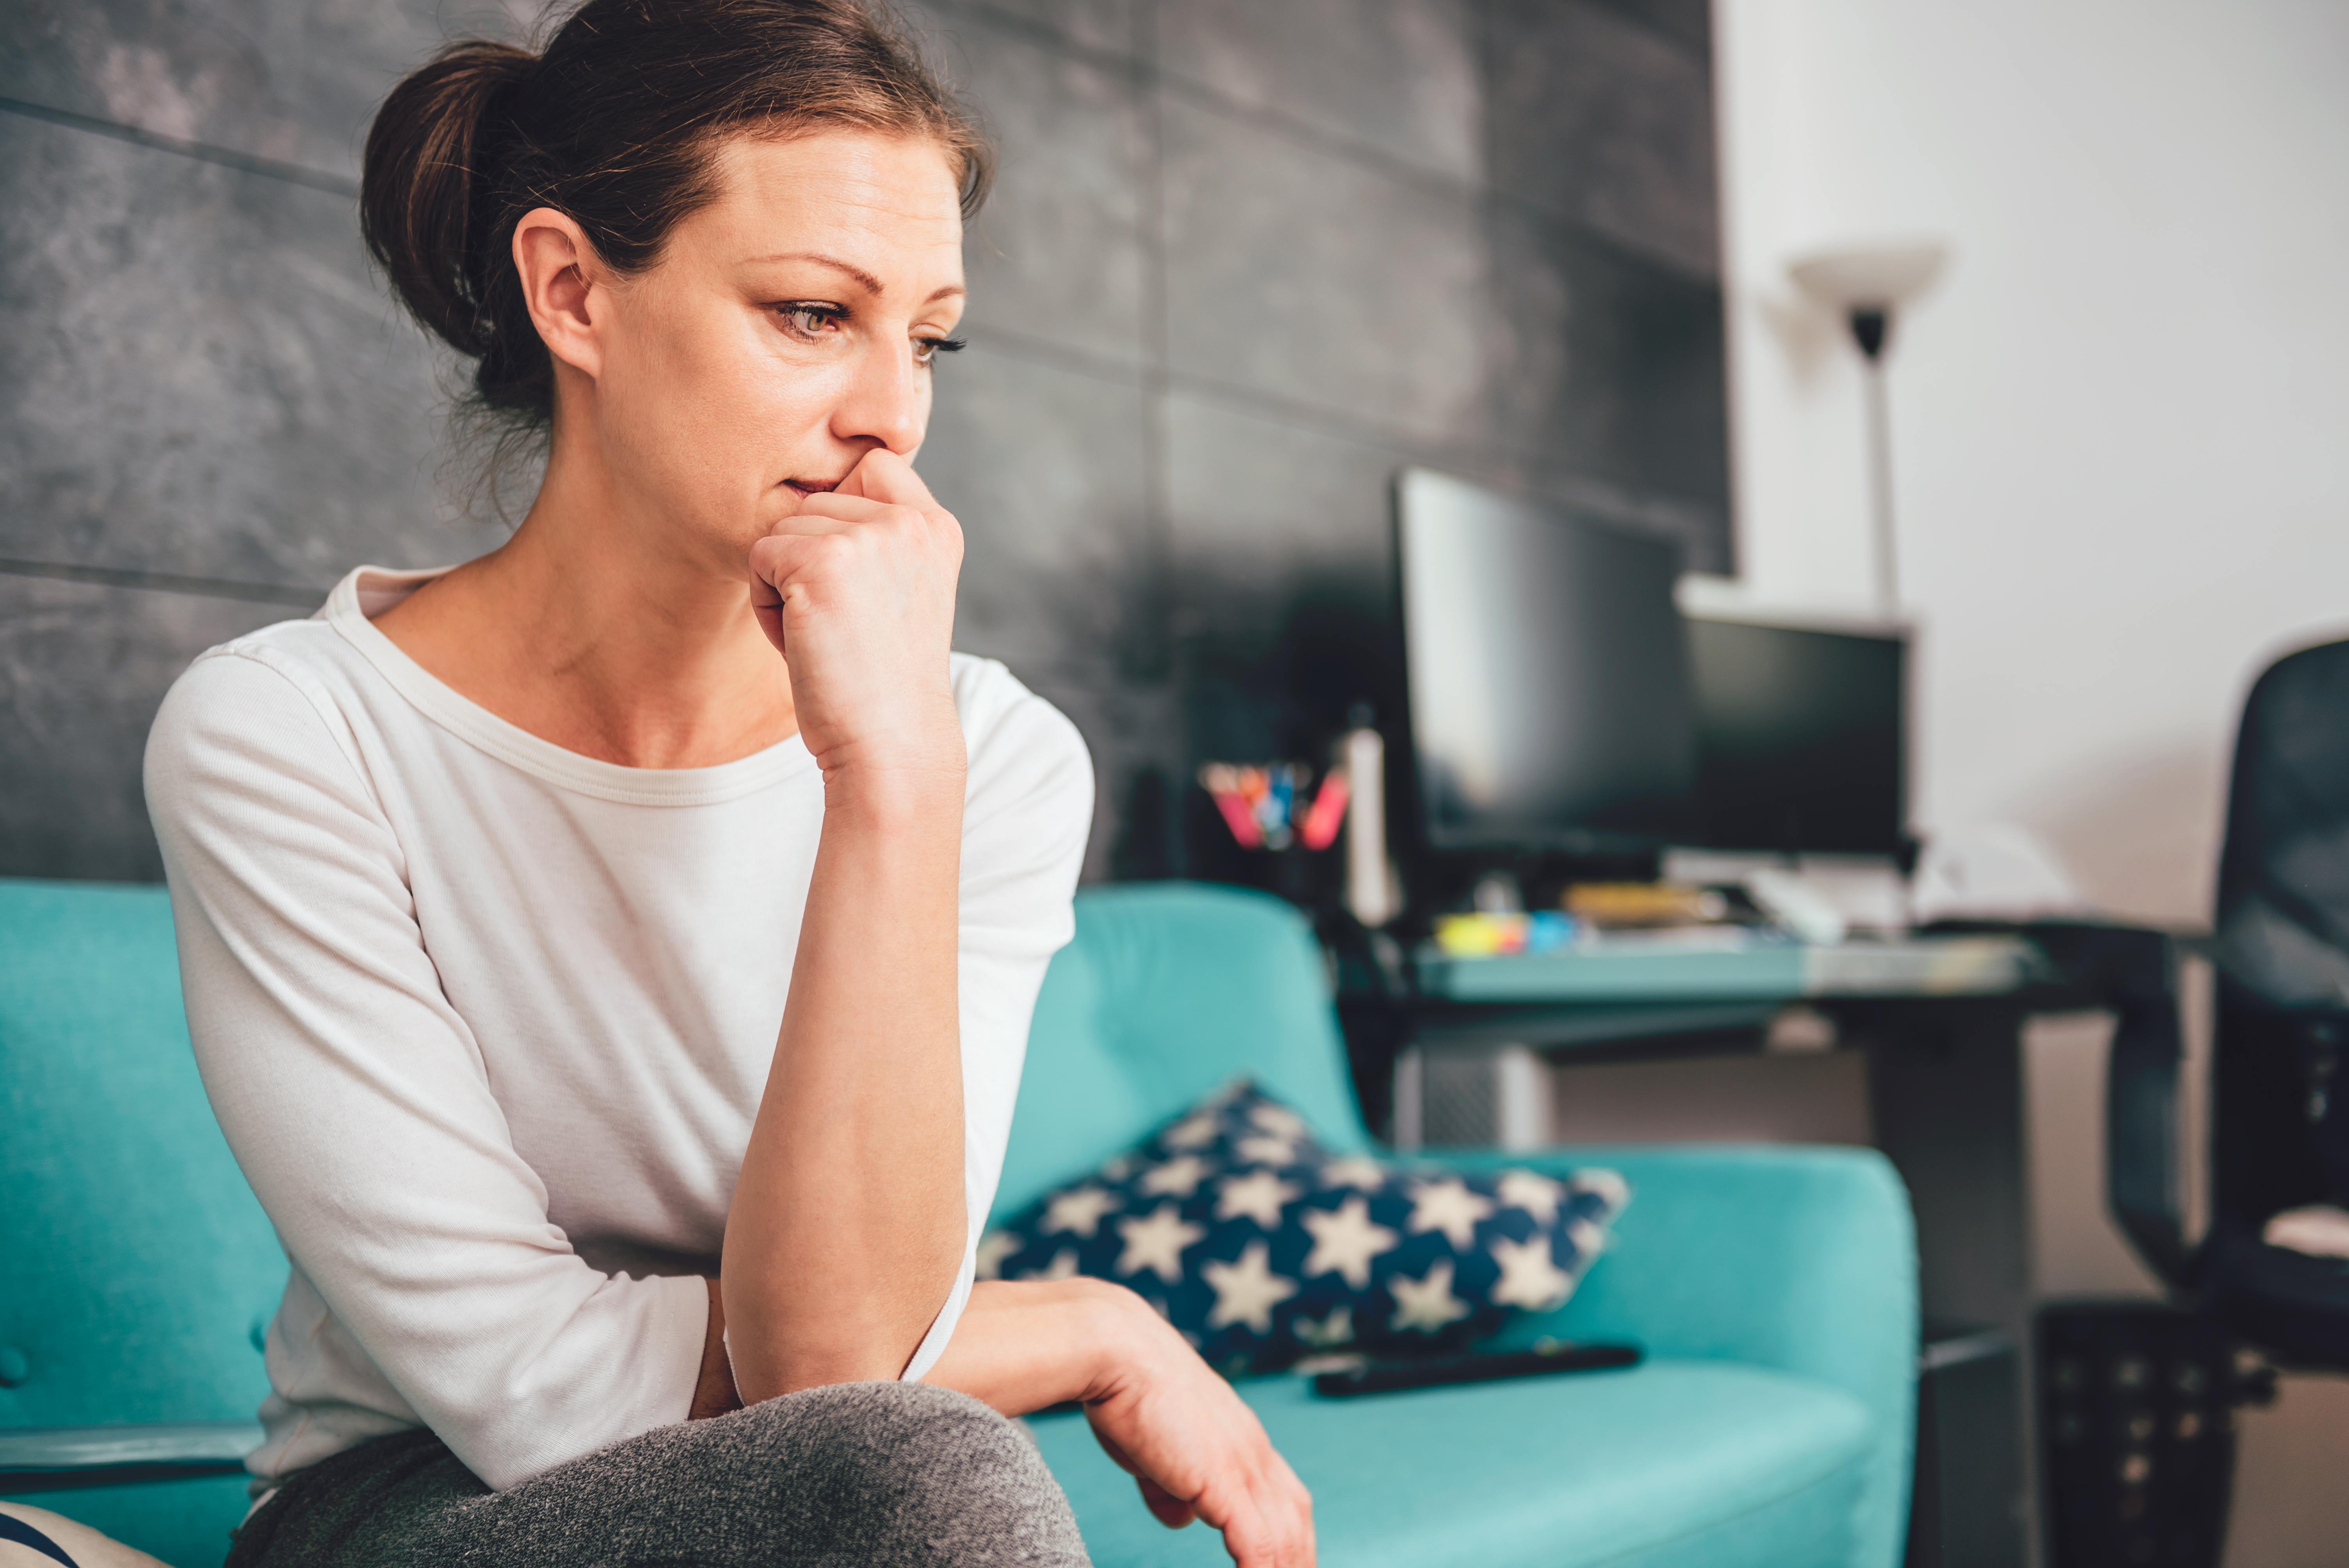 An upset mother sitting on the sofa | Source: Shutterstock